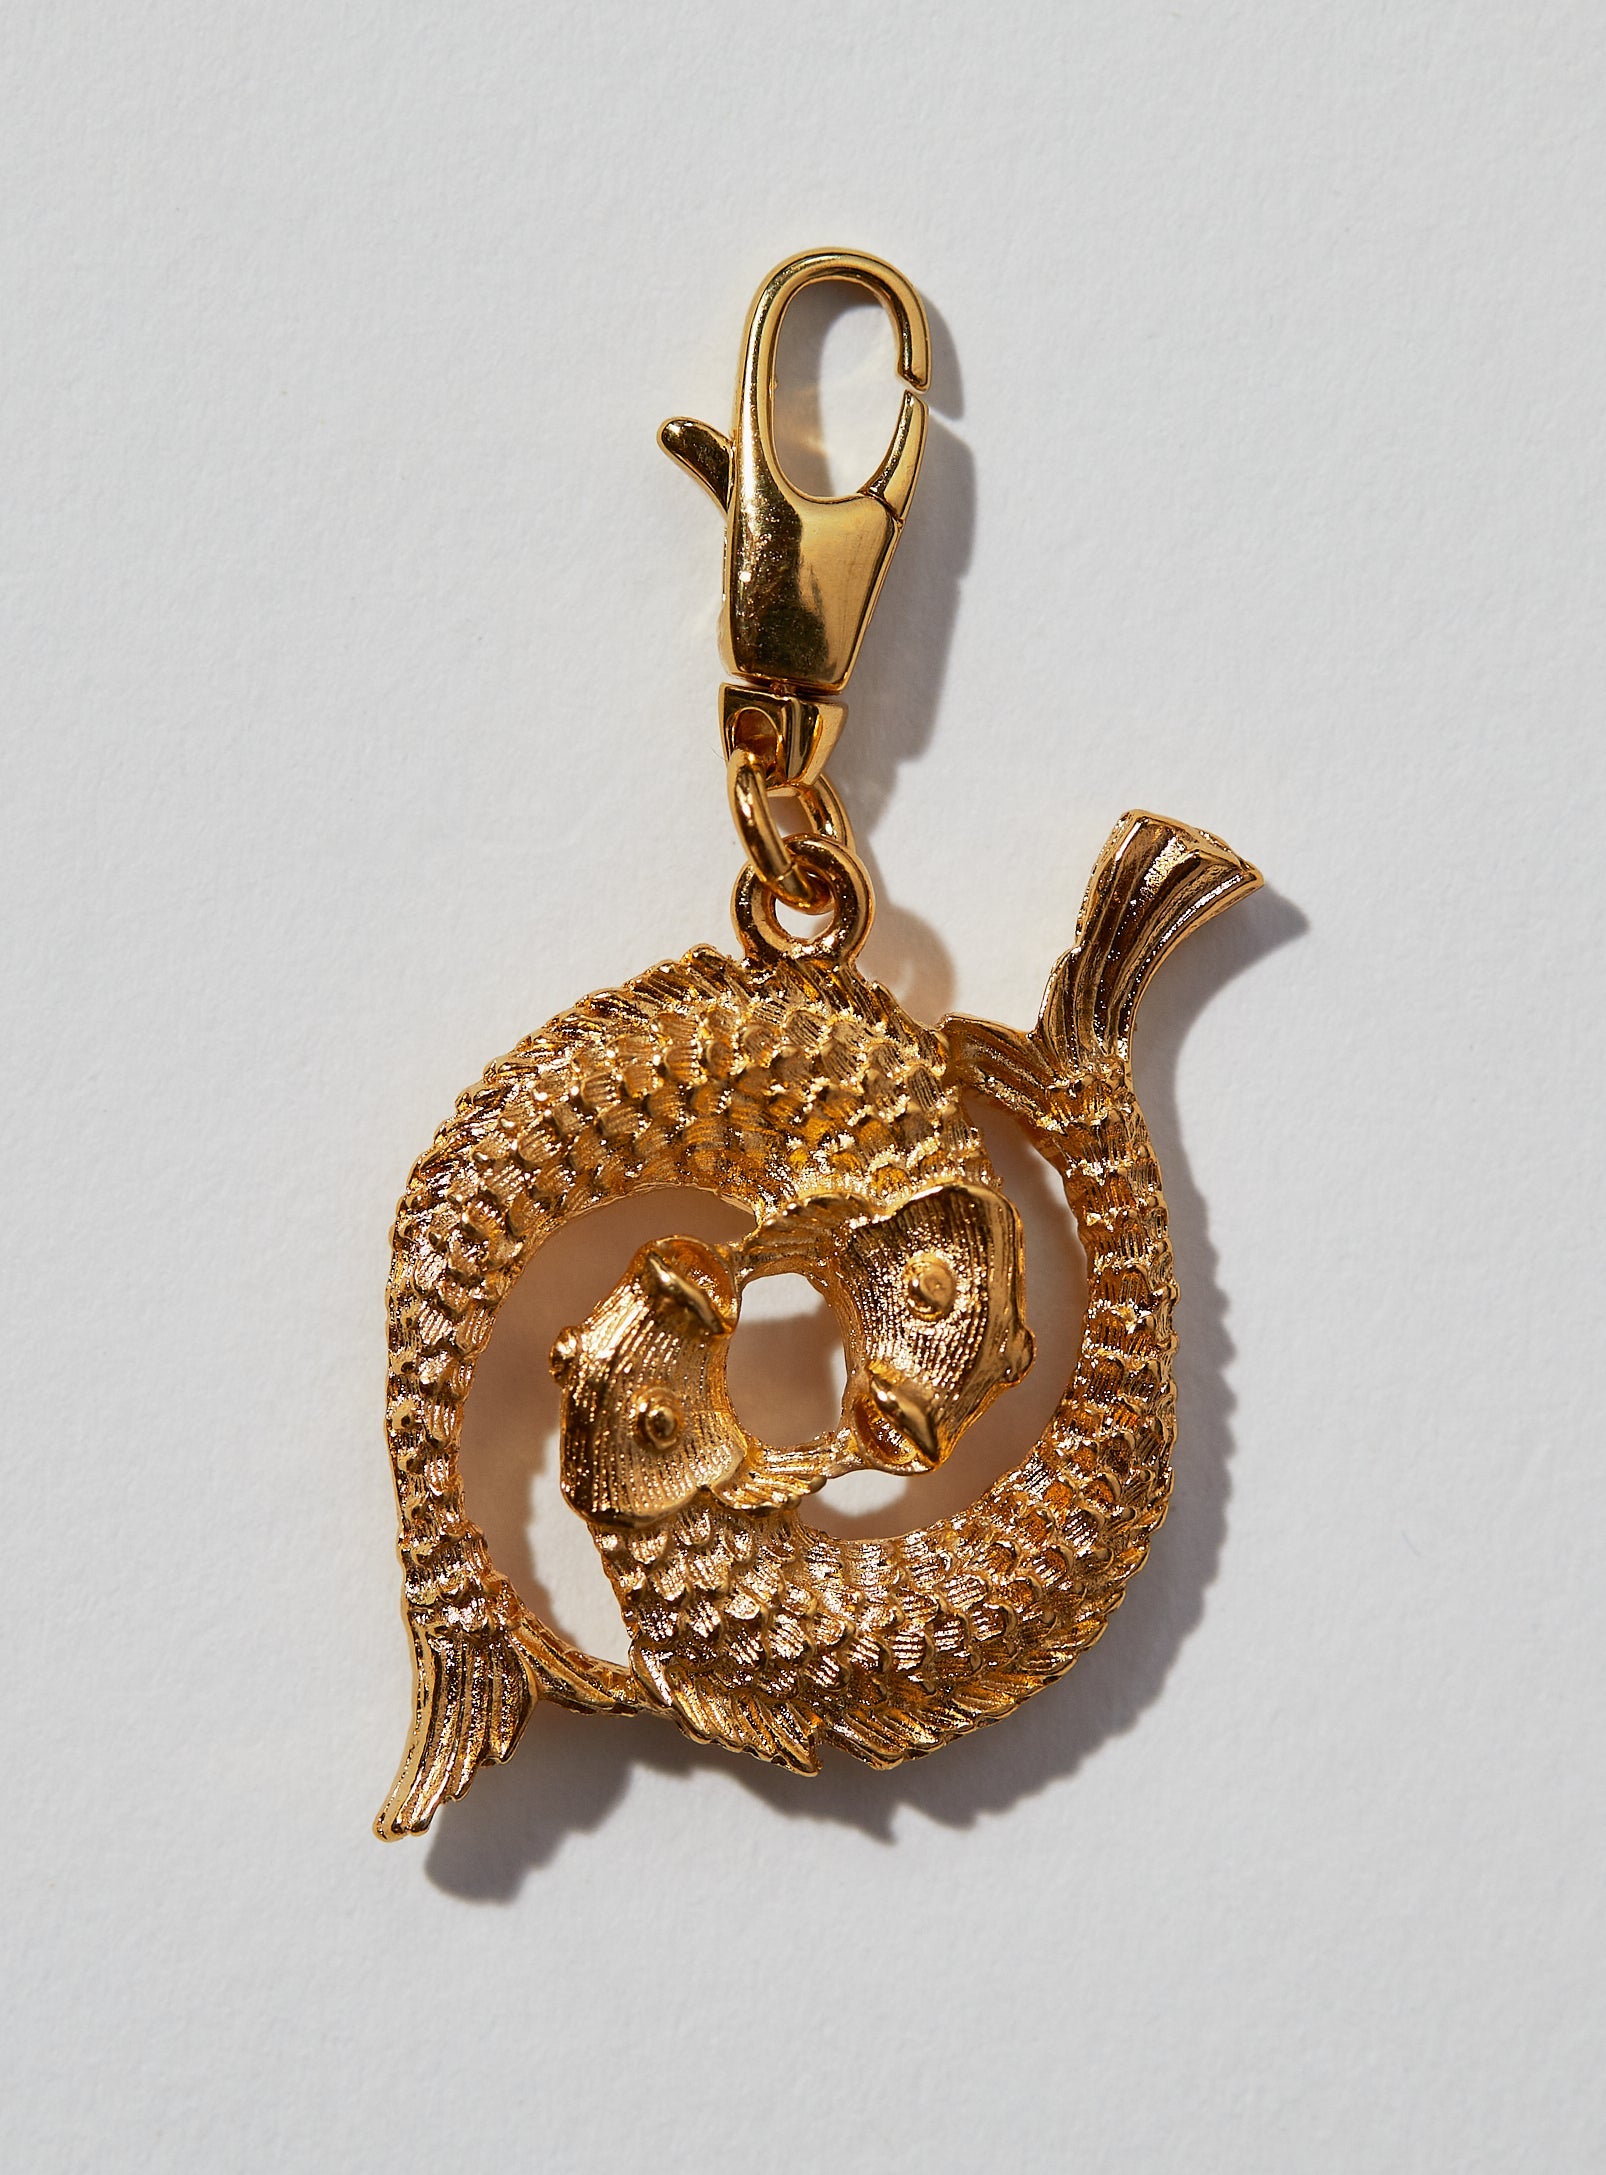 This 3 dimensional pendant comes in 22k gold or rhodium electroplate and a swivel lobster clasp for the best possible displaying of your astrological self. This zodiac charm is perfect for adding onto our zodiac necklace or any other necklace or bracelet.  SEE OUR OTHER PRODUCT LISTINGS TO BUY THE CHAIN  If not in stock, item takes approximately 4-8 weeks to produce. Feel free to email info@paricijewellery.com to see if item is currently in stock.